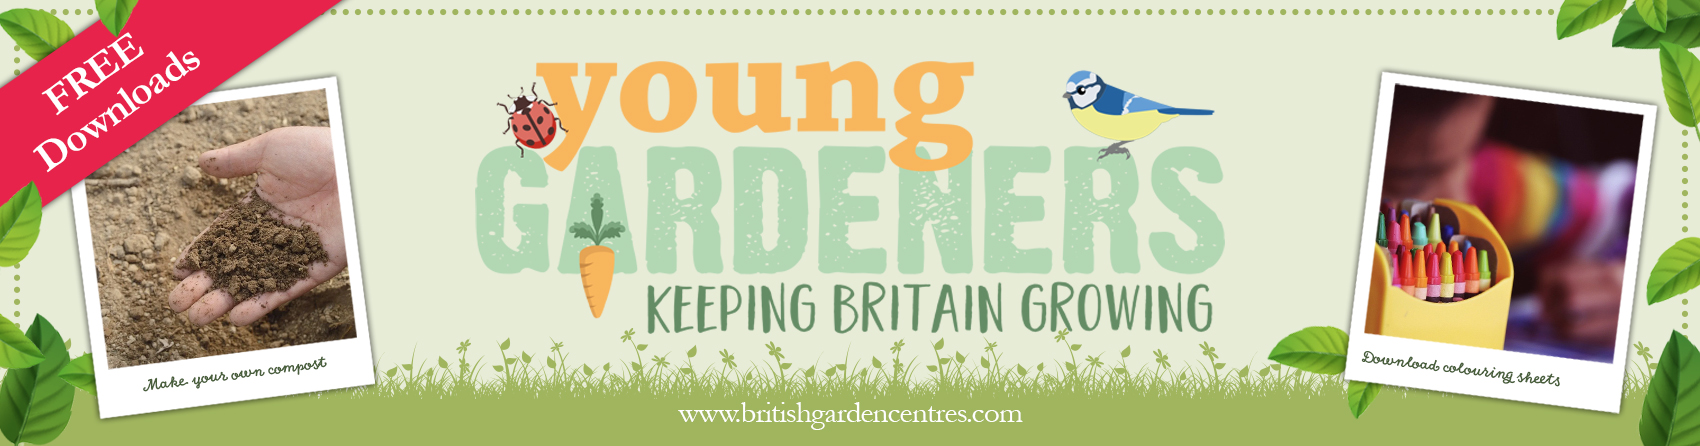 BGC web banner - young gardeners MARCH